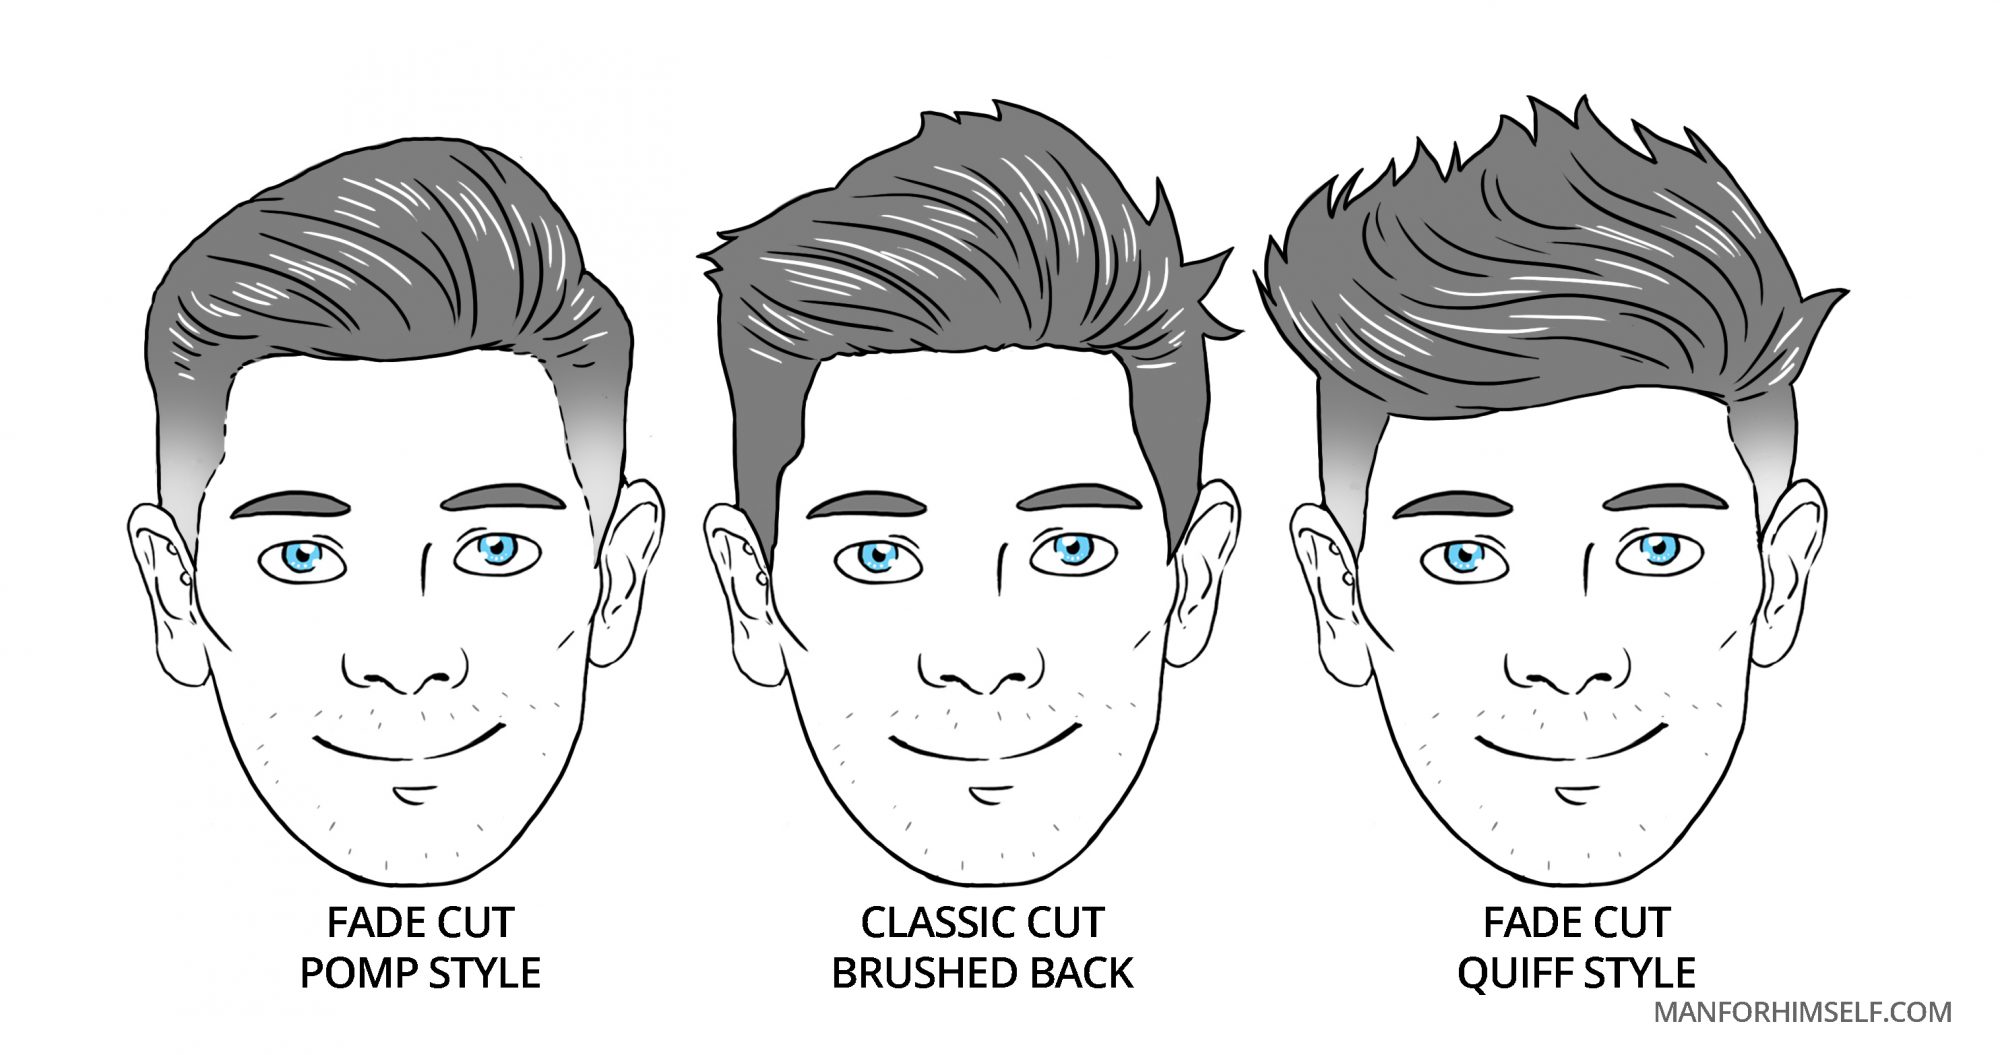 What are some good looking men hairstyles for oblong face which are not  that fancy? - Quora